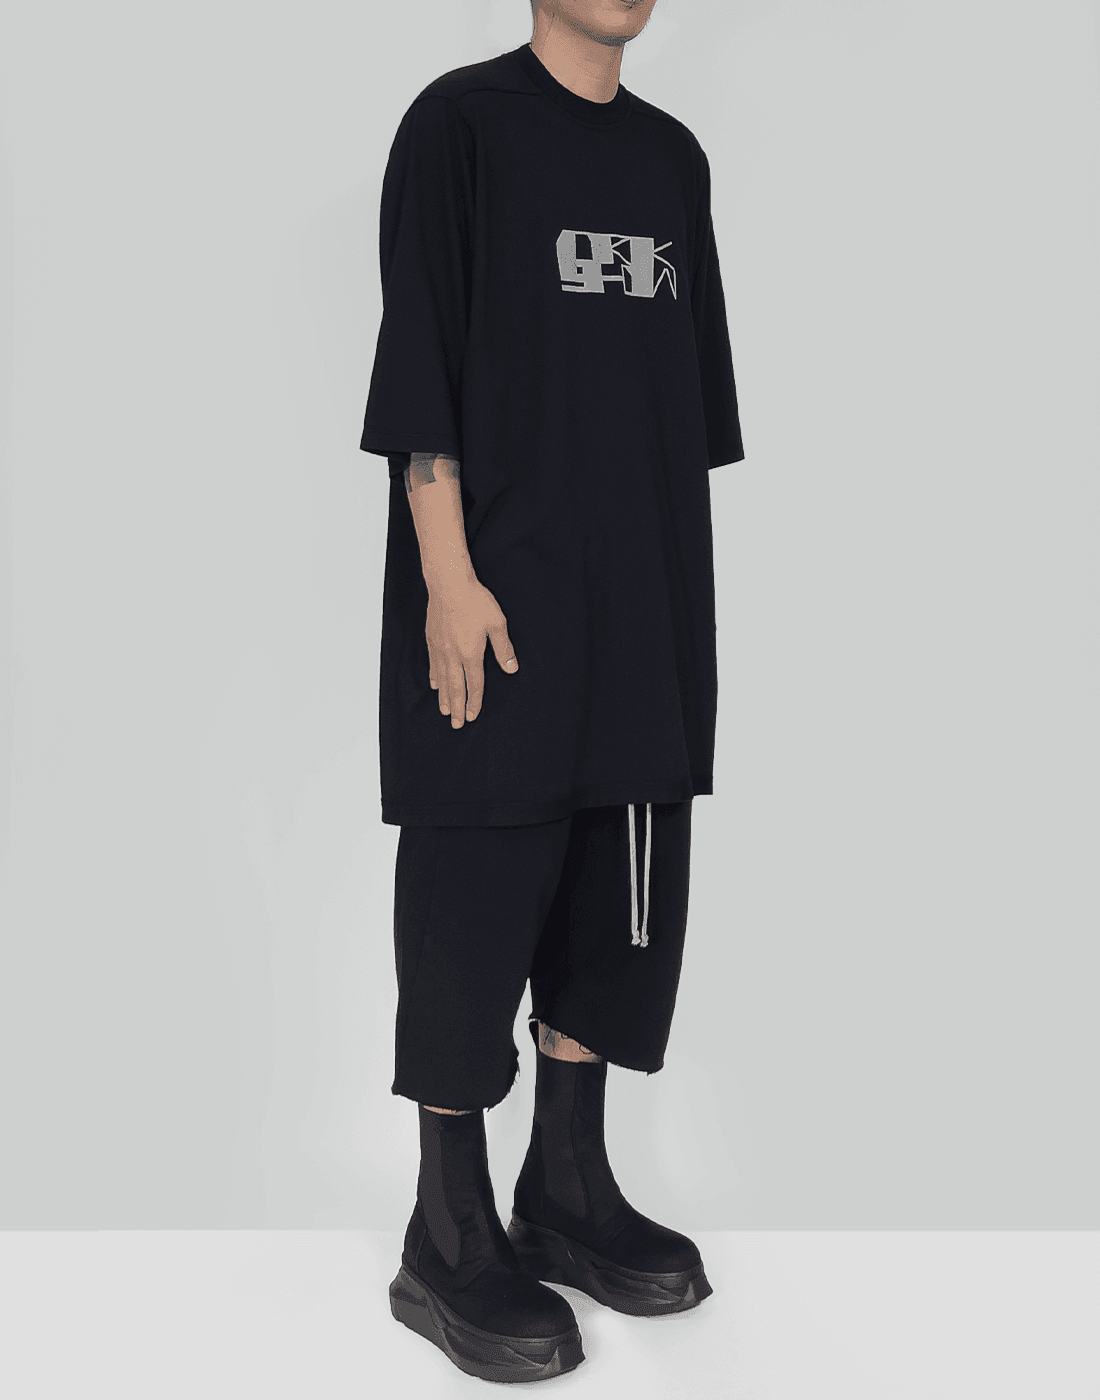 RICK OWENCE DRKSHDW JUMBO PATCH TEE16SS定価 - Tシャツ/カットソー